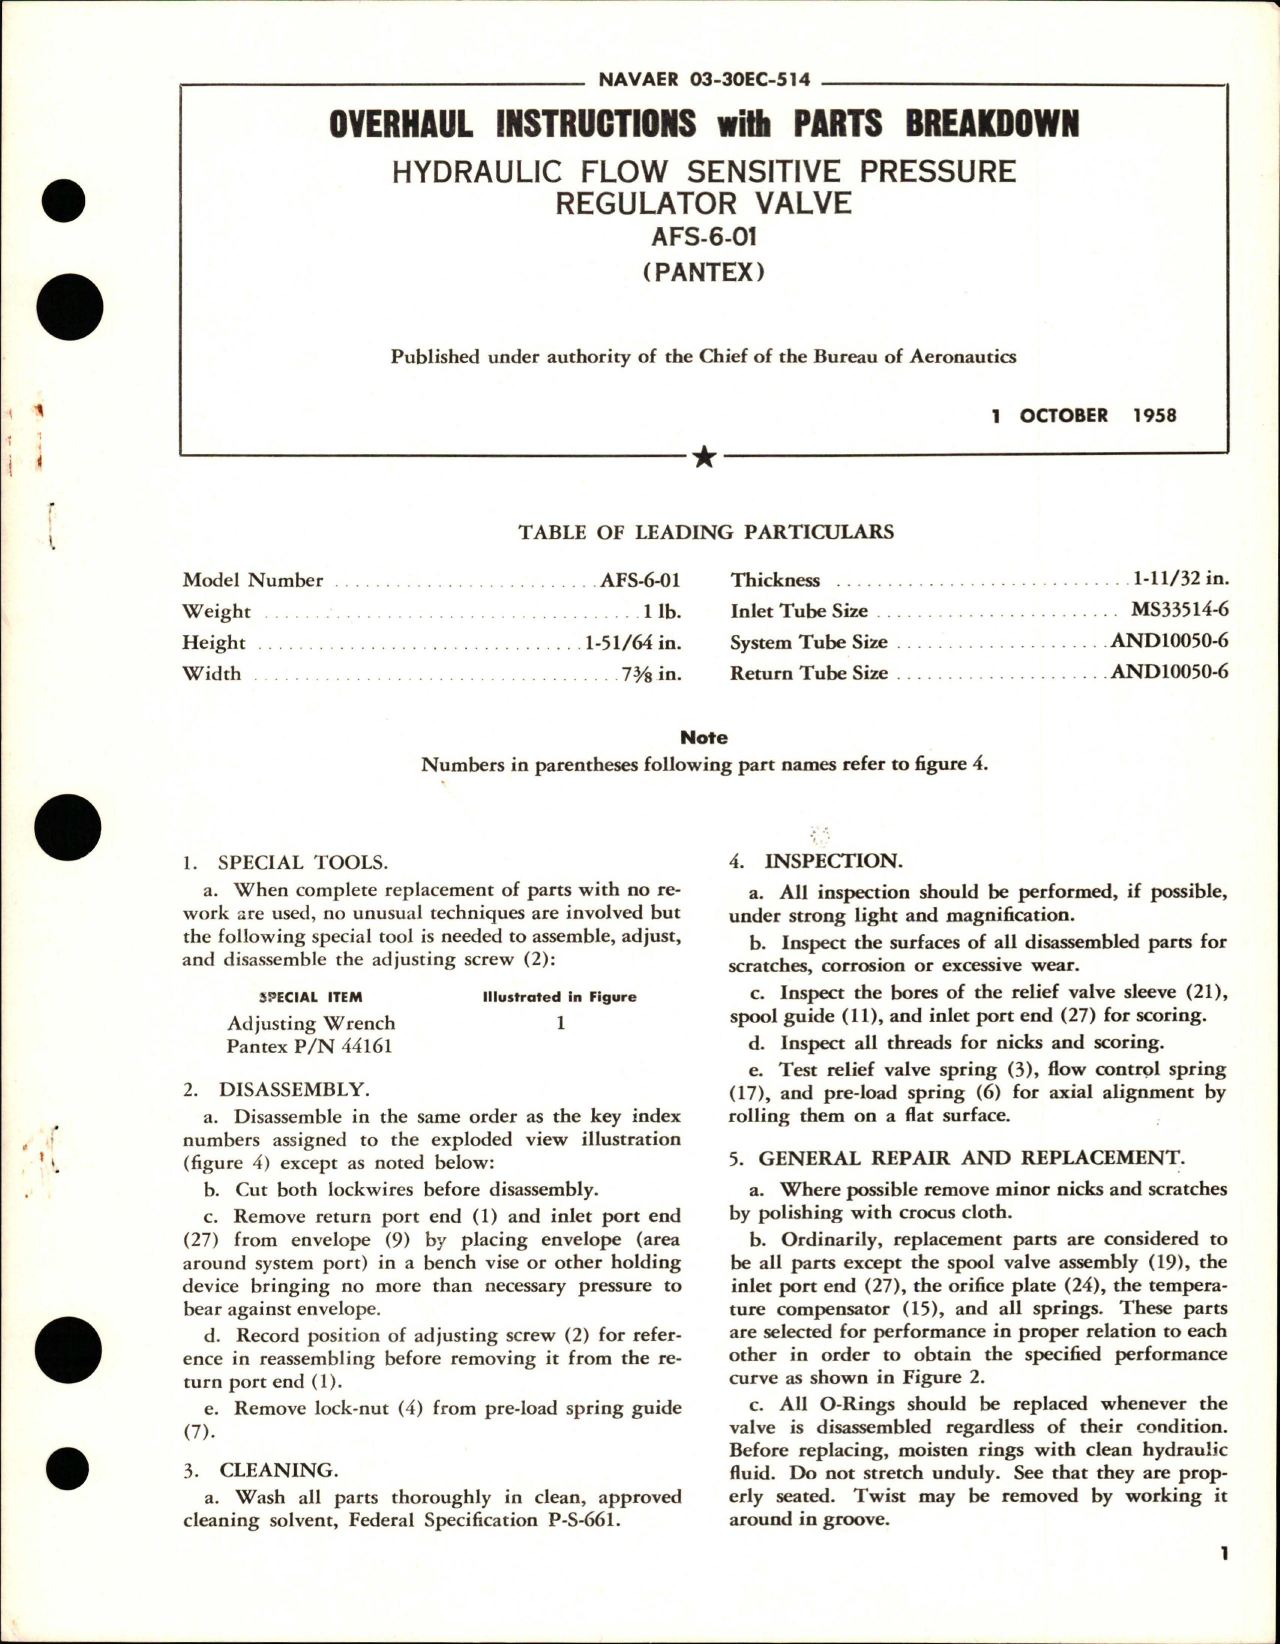 Sample page 1 from AirCorps Library document: Overhaul Instructions with Parts Breakdown for Hydraulic Flow Sensitive Pressure Regulator Valve - AFS-6-01